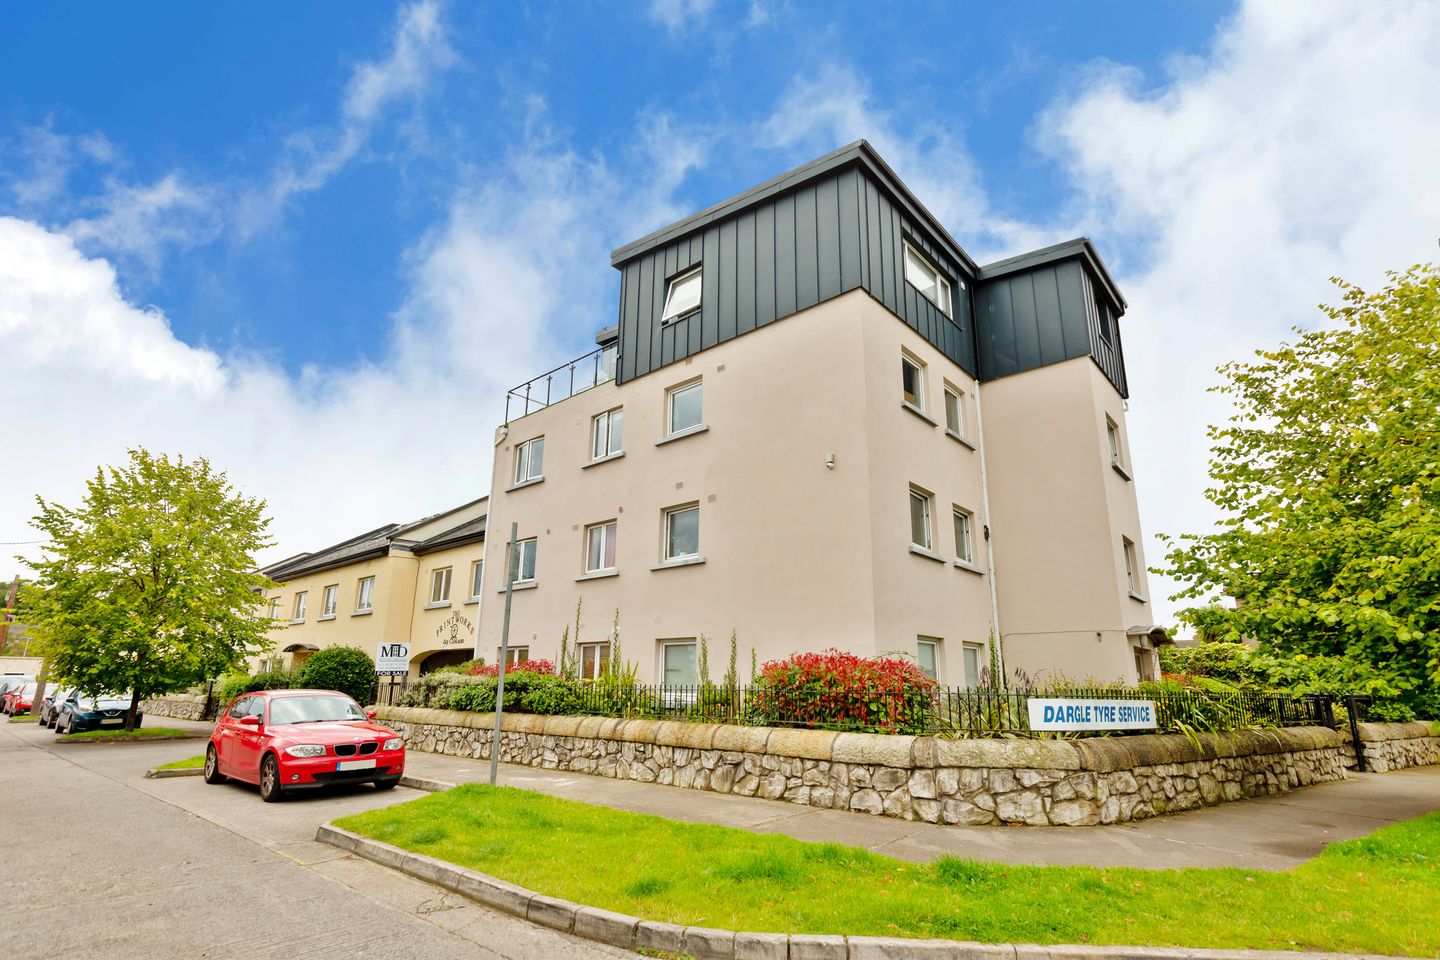 17 The Printworks, Adelaide Villas, Bray, Co. Wicklow, A98FR34